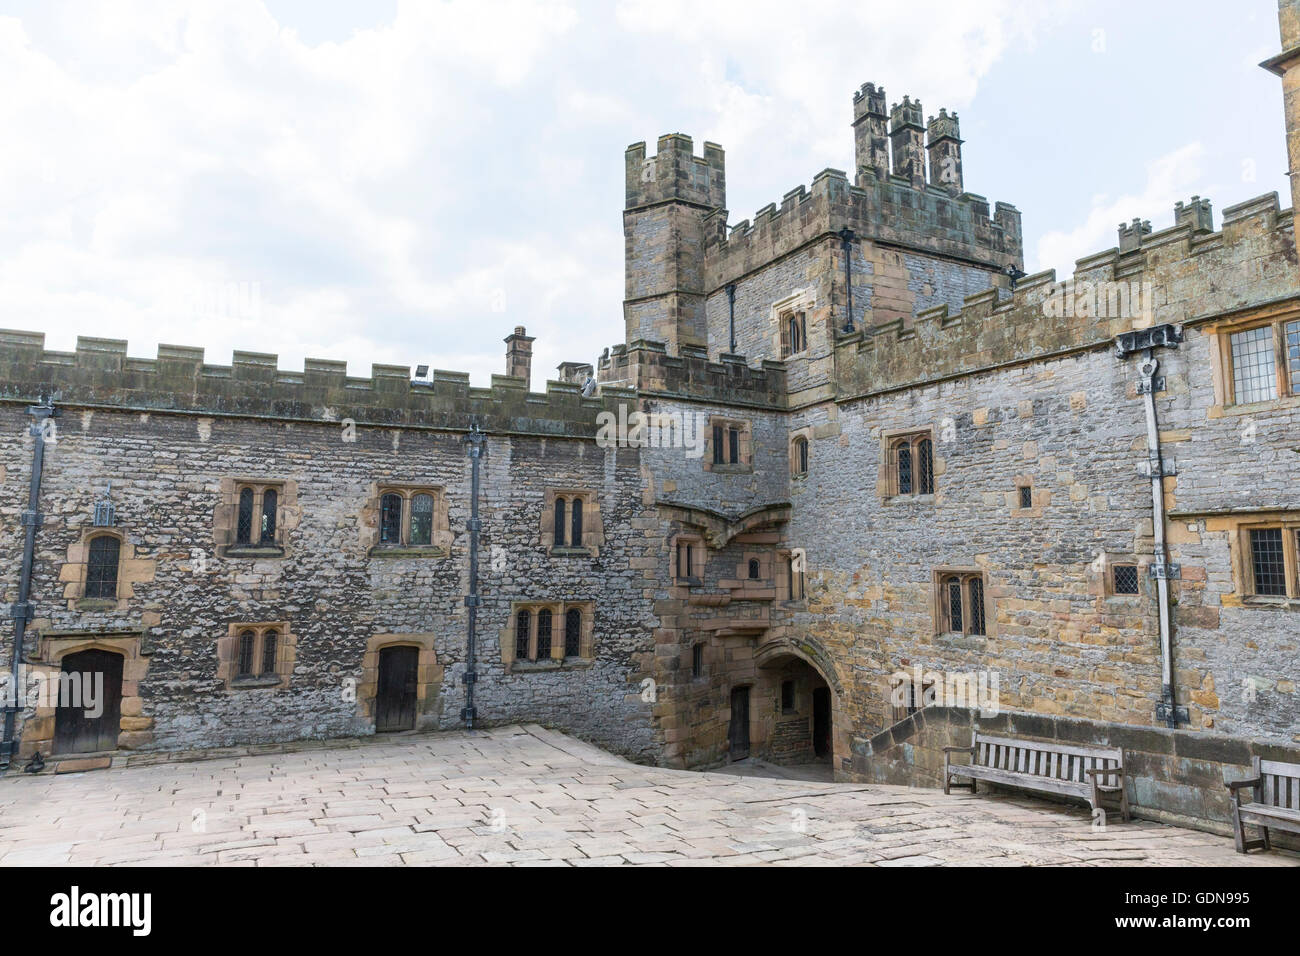 Haddon Hall in Derbyshire dating back to Tudor times and the site of many historical dramas. Stock Photo